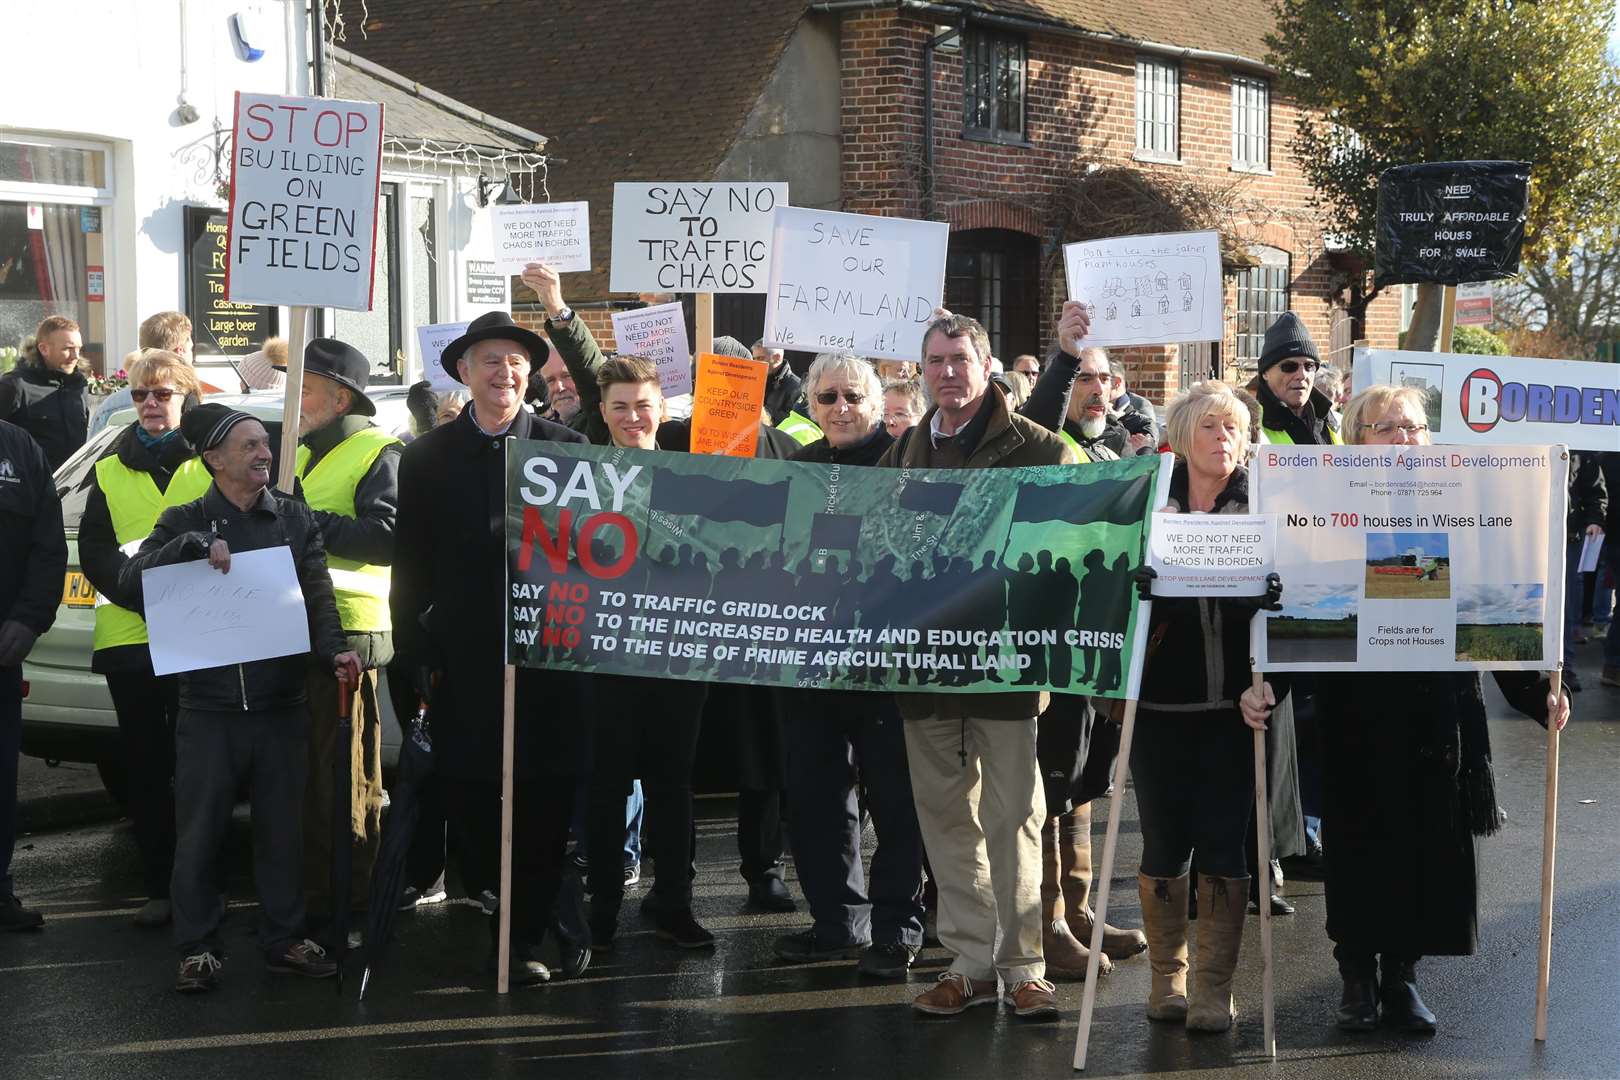 Some of the Borden Residents Against Development on a protest march against housing plans in Borden in January. Picture: John Westhrop